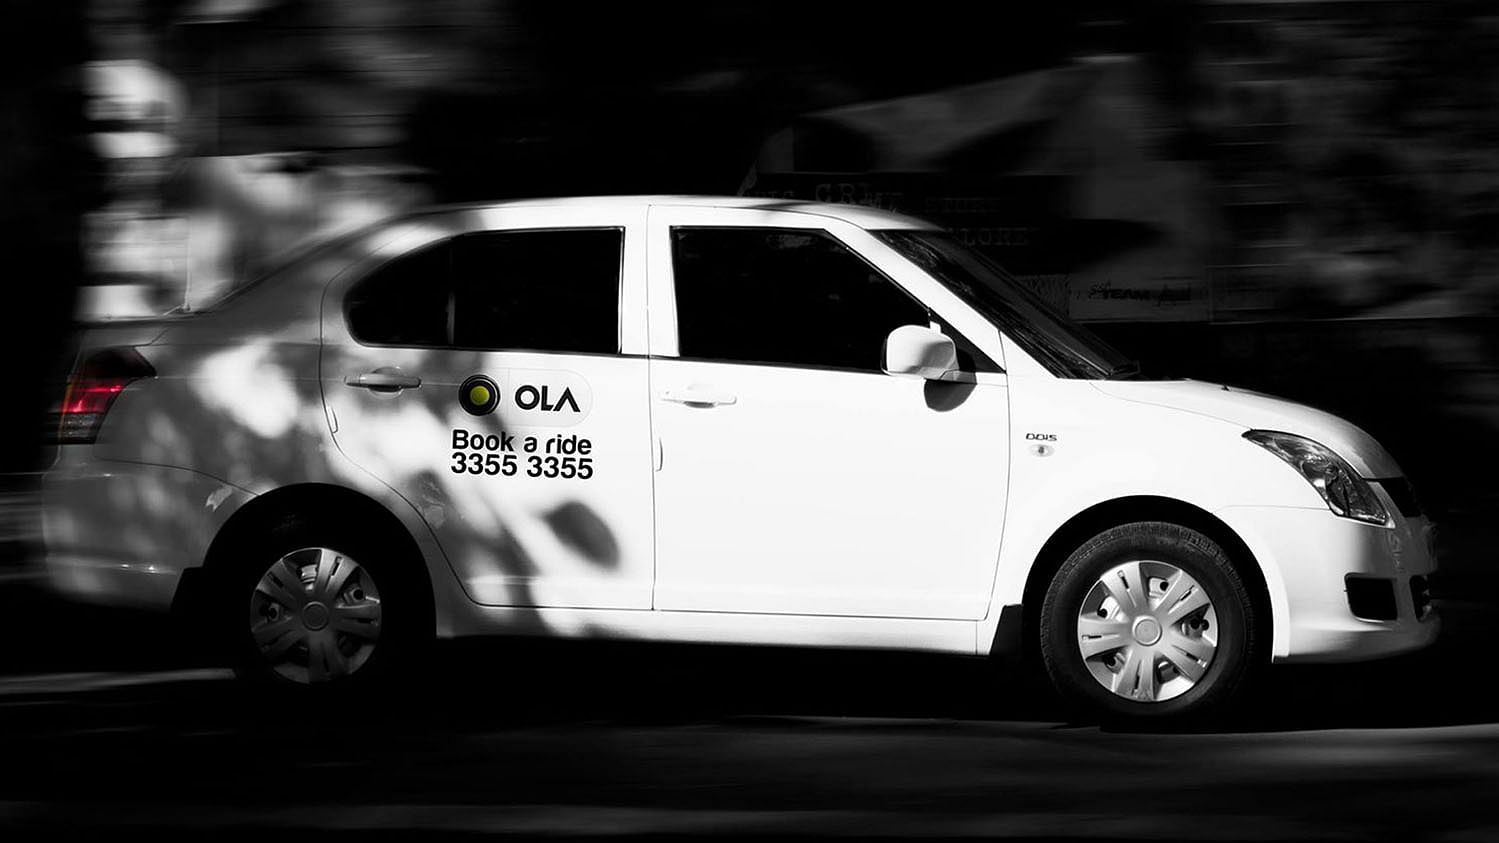 Ola cab is riding a solo battle with Uber in India.&nbsp;